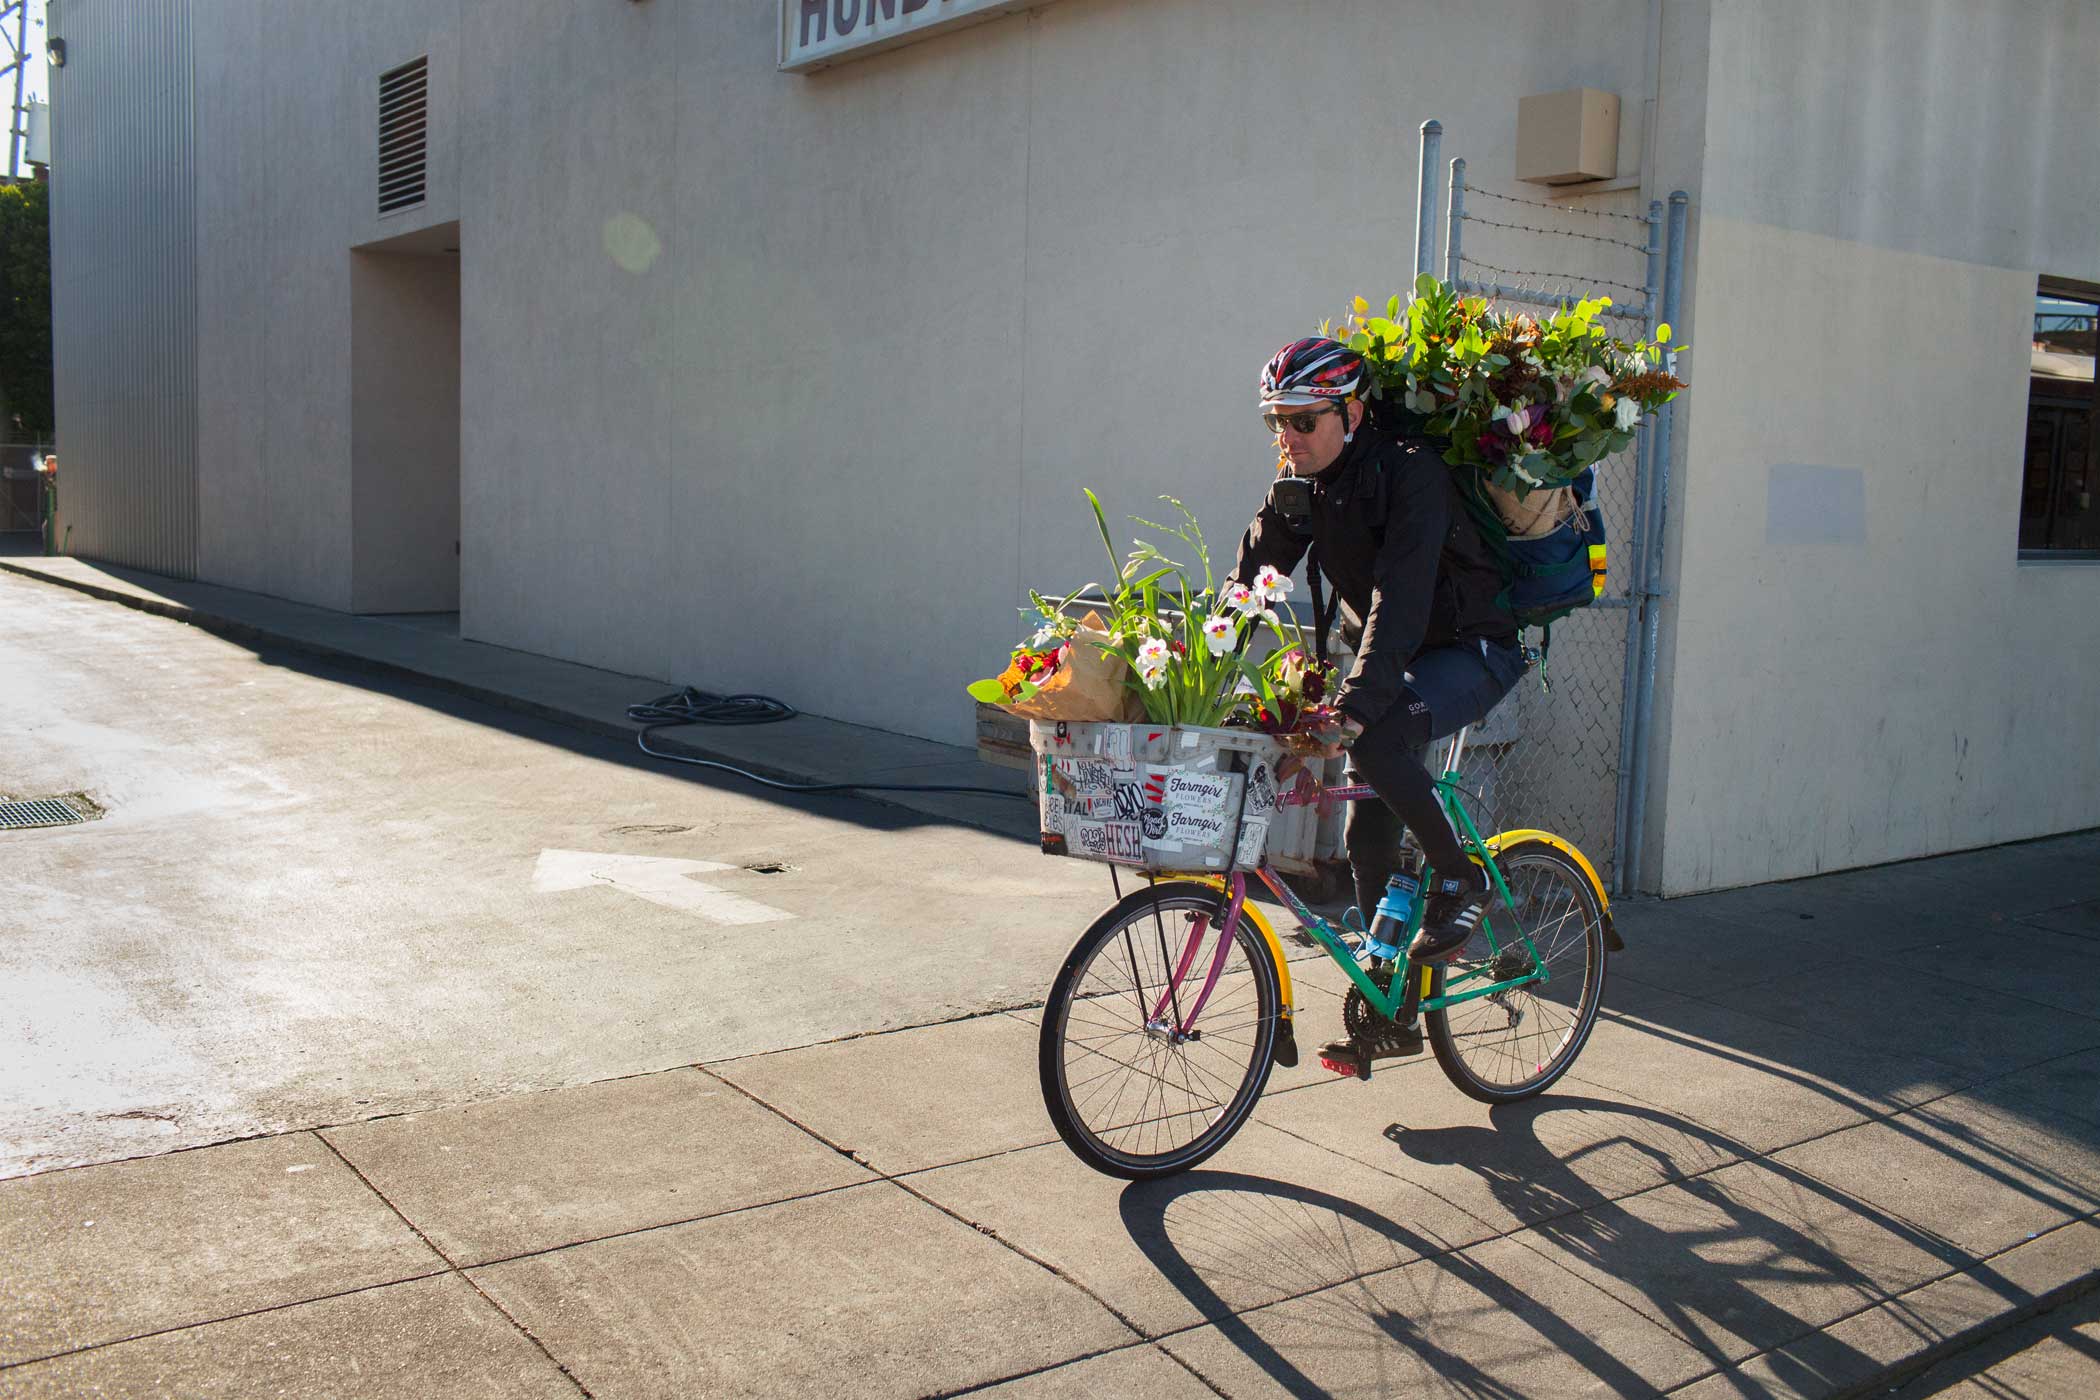 A flower delivery employee bikes to deliver his first flowers of the day.